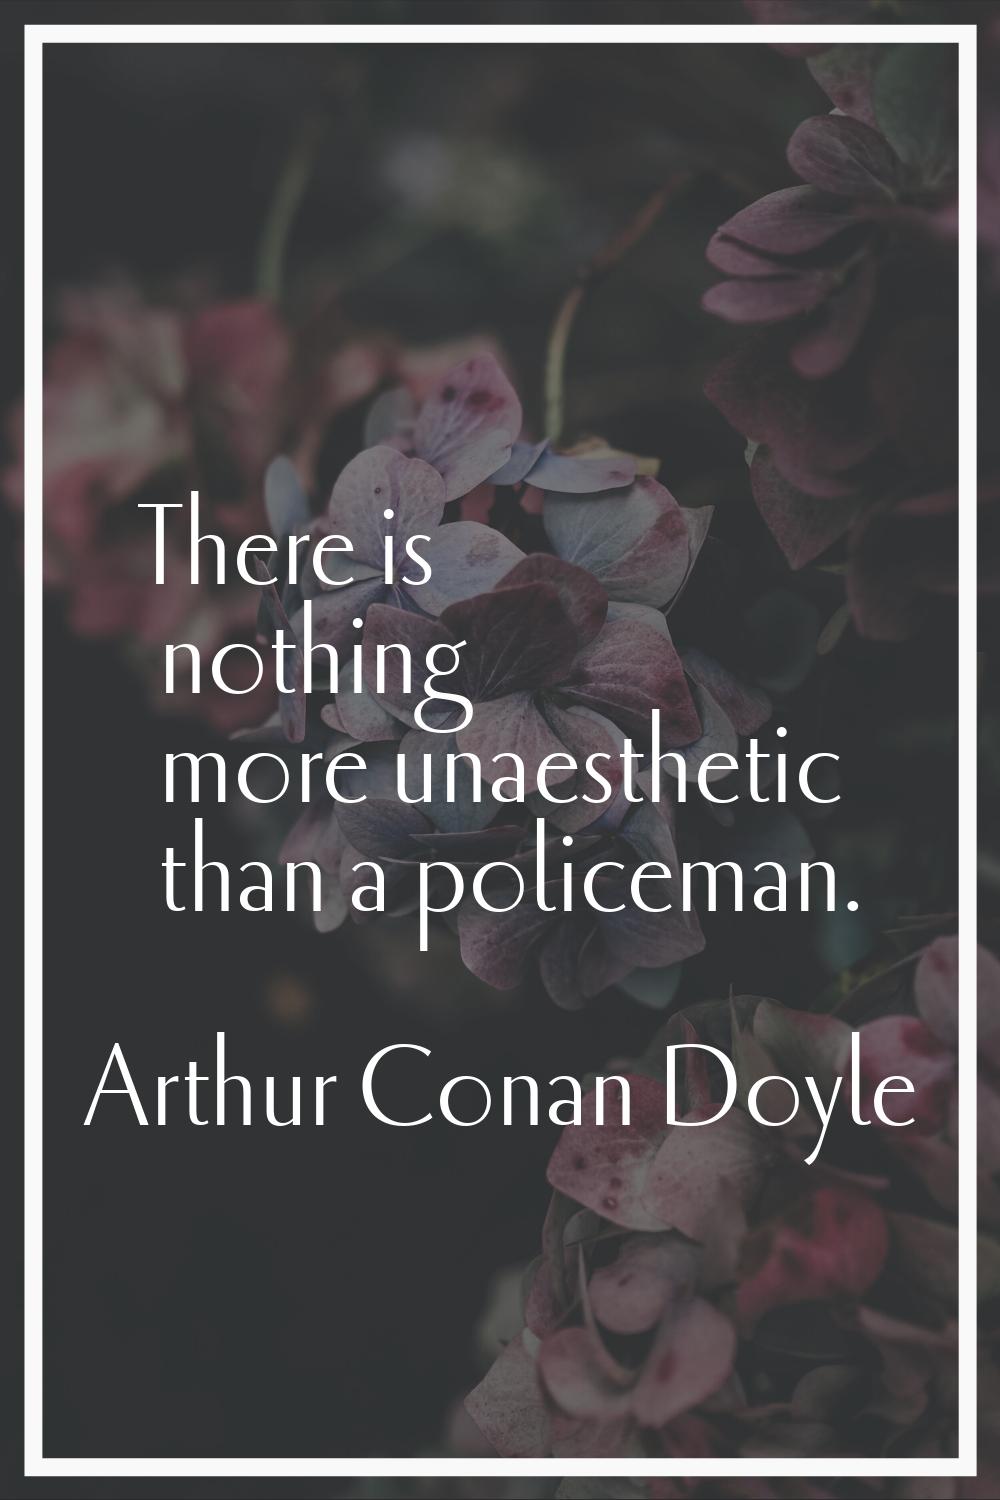 There is nothing more unaesthetic than a policeman.